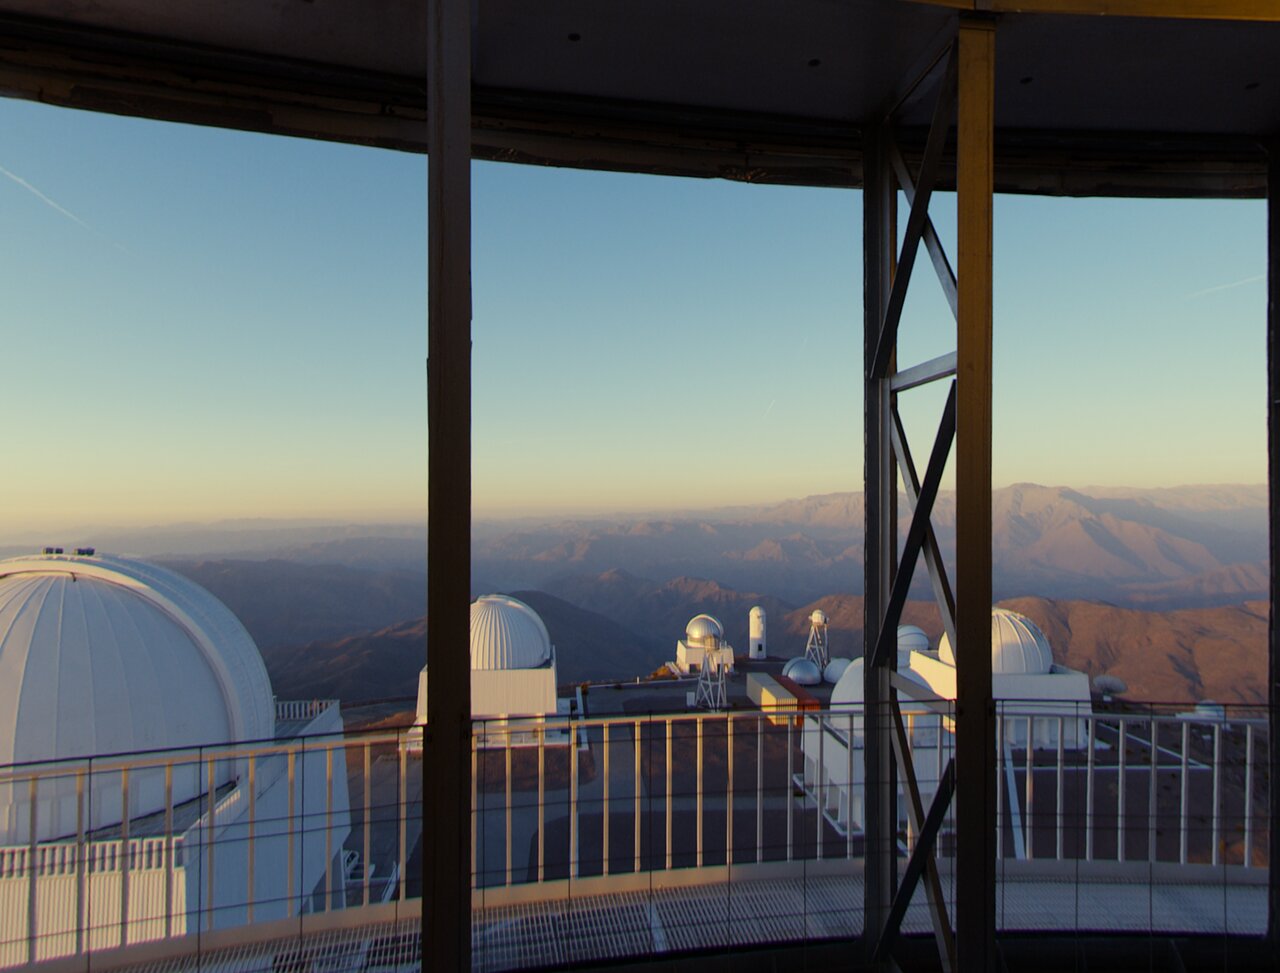 A still captured from the award-winning bilingual planetarium show Big Astronomy: People, Places, Discoveries showing Cerro Tololo Inter-American Observatory (CTIO), a Program of NSF’s NOIRLab.